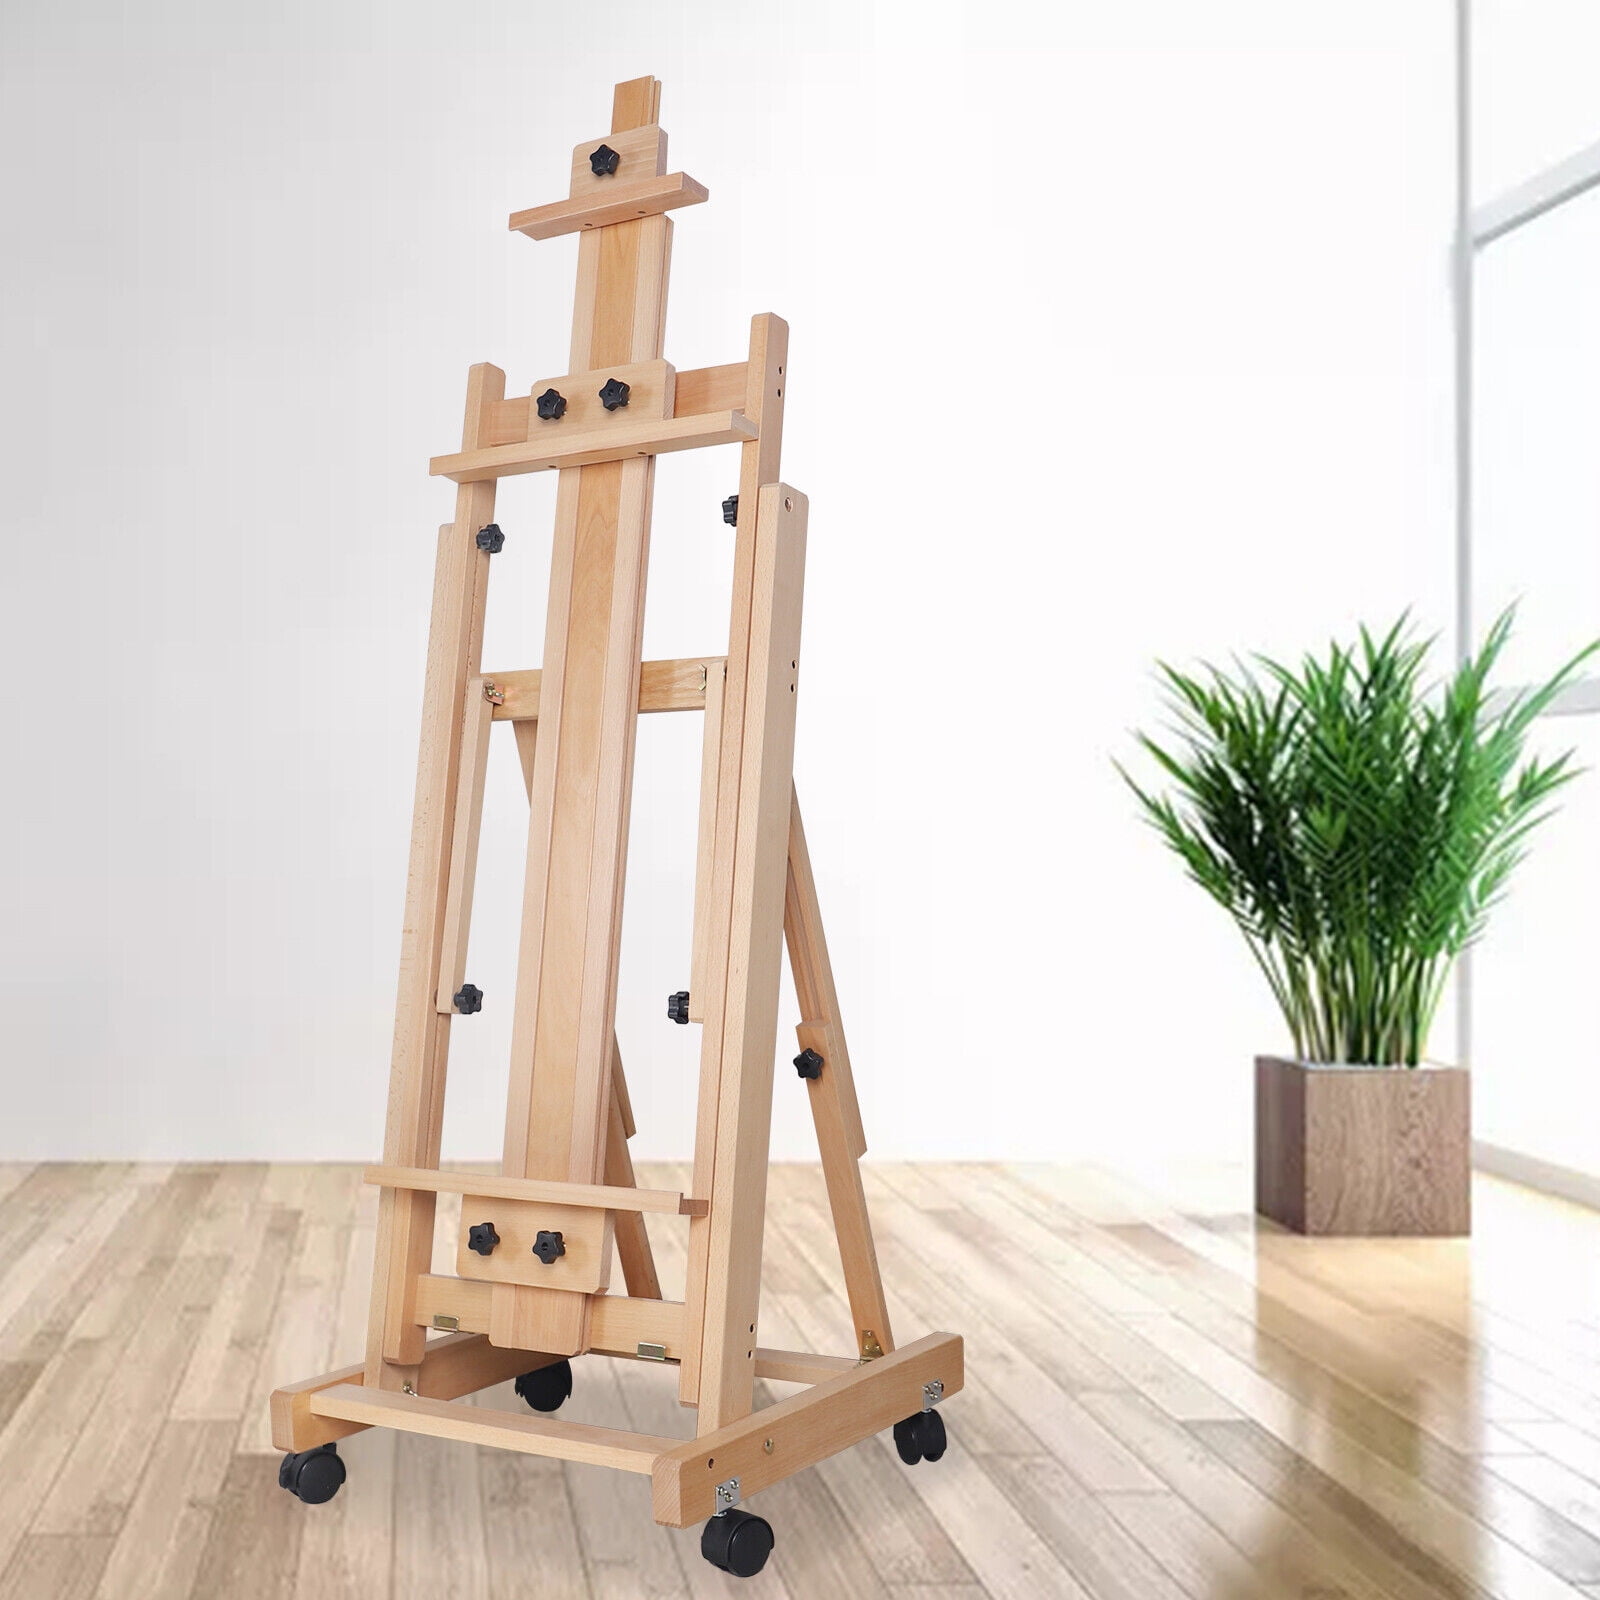 uyoyous Adjustable Height Wood A-frame Art Easel Stand for Painting